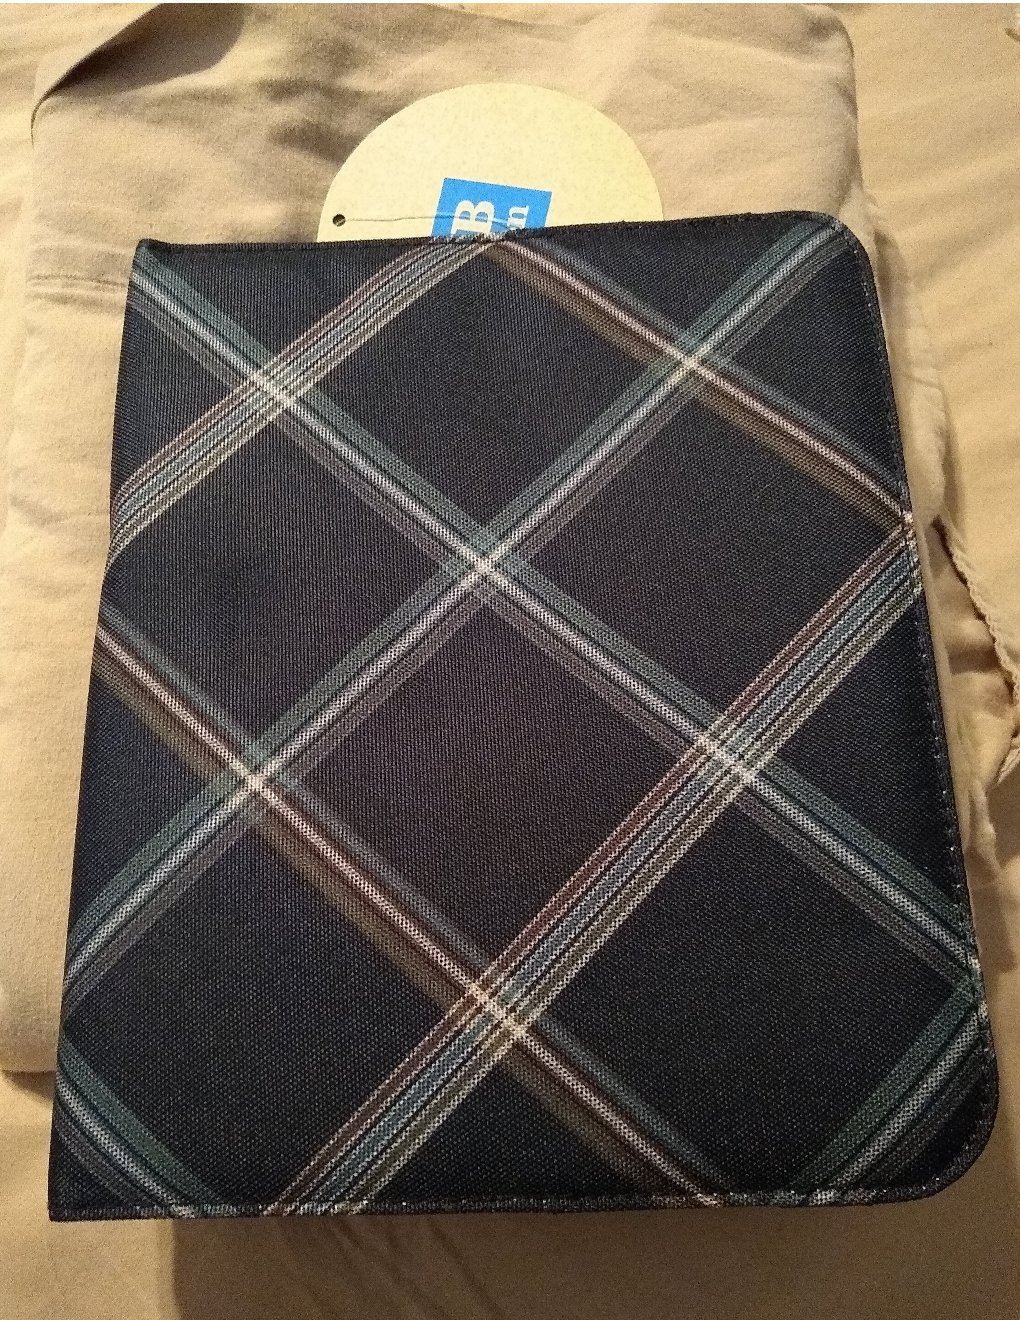 Pottery Barn Pack It School iTablet iPad Protective Case Cover in Classic Plaid NEW